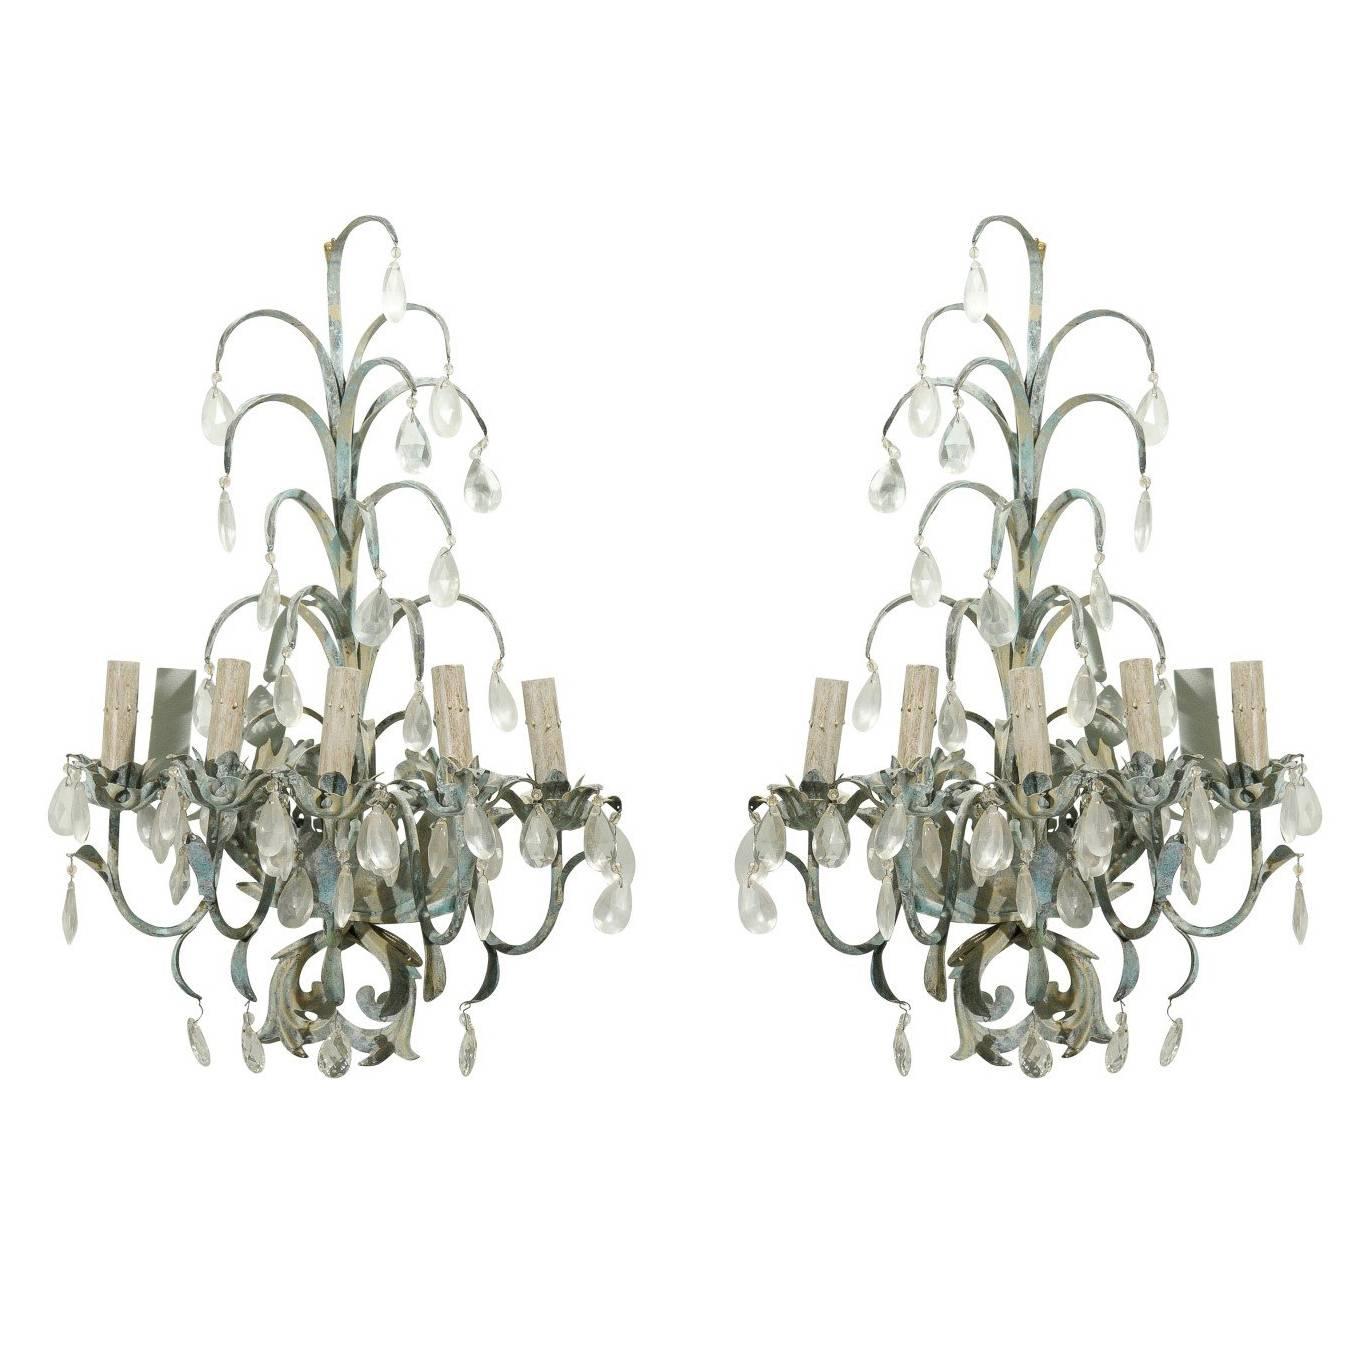 French Vintage Painted Metal and Crystal Five-Light Sconces For Sale